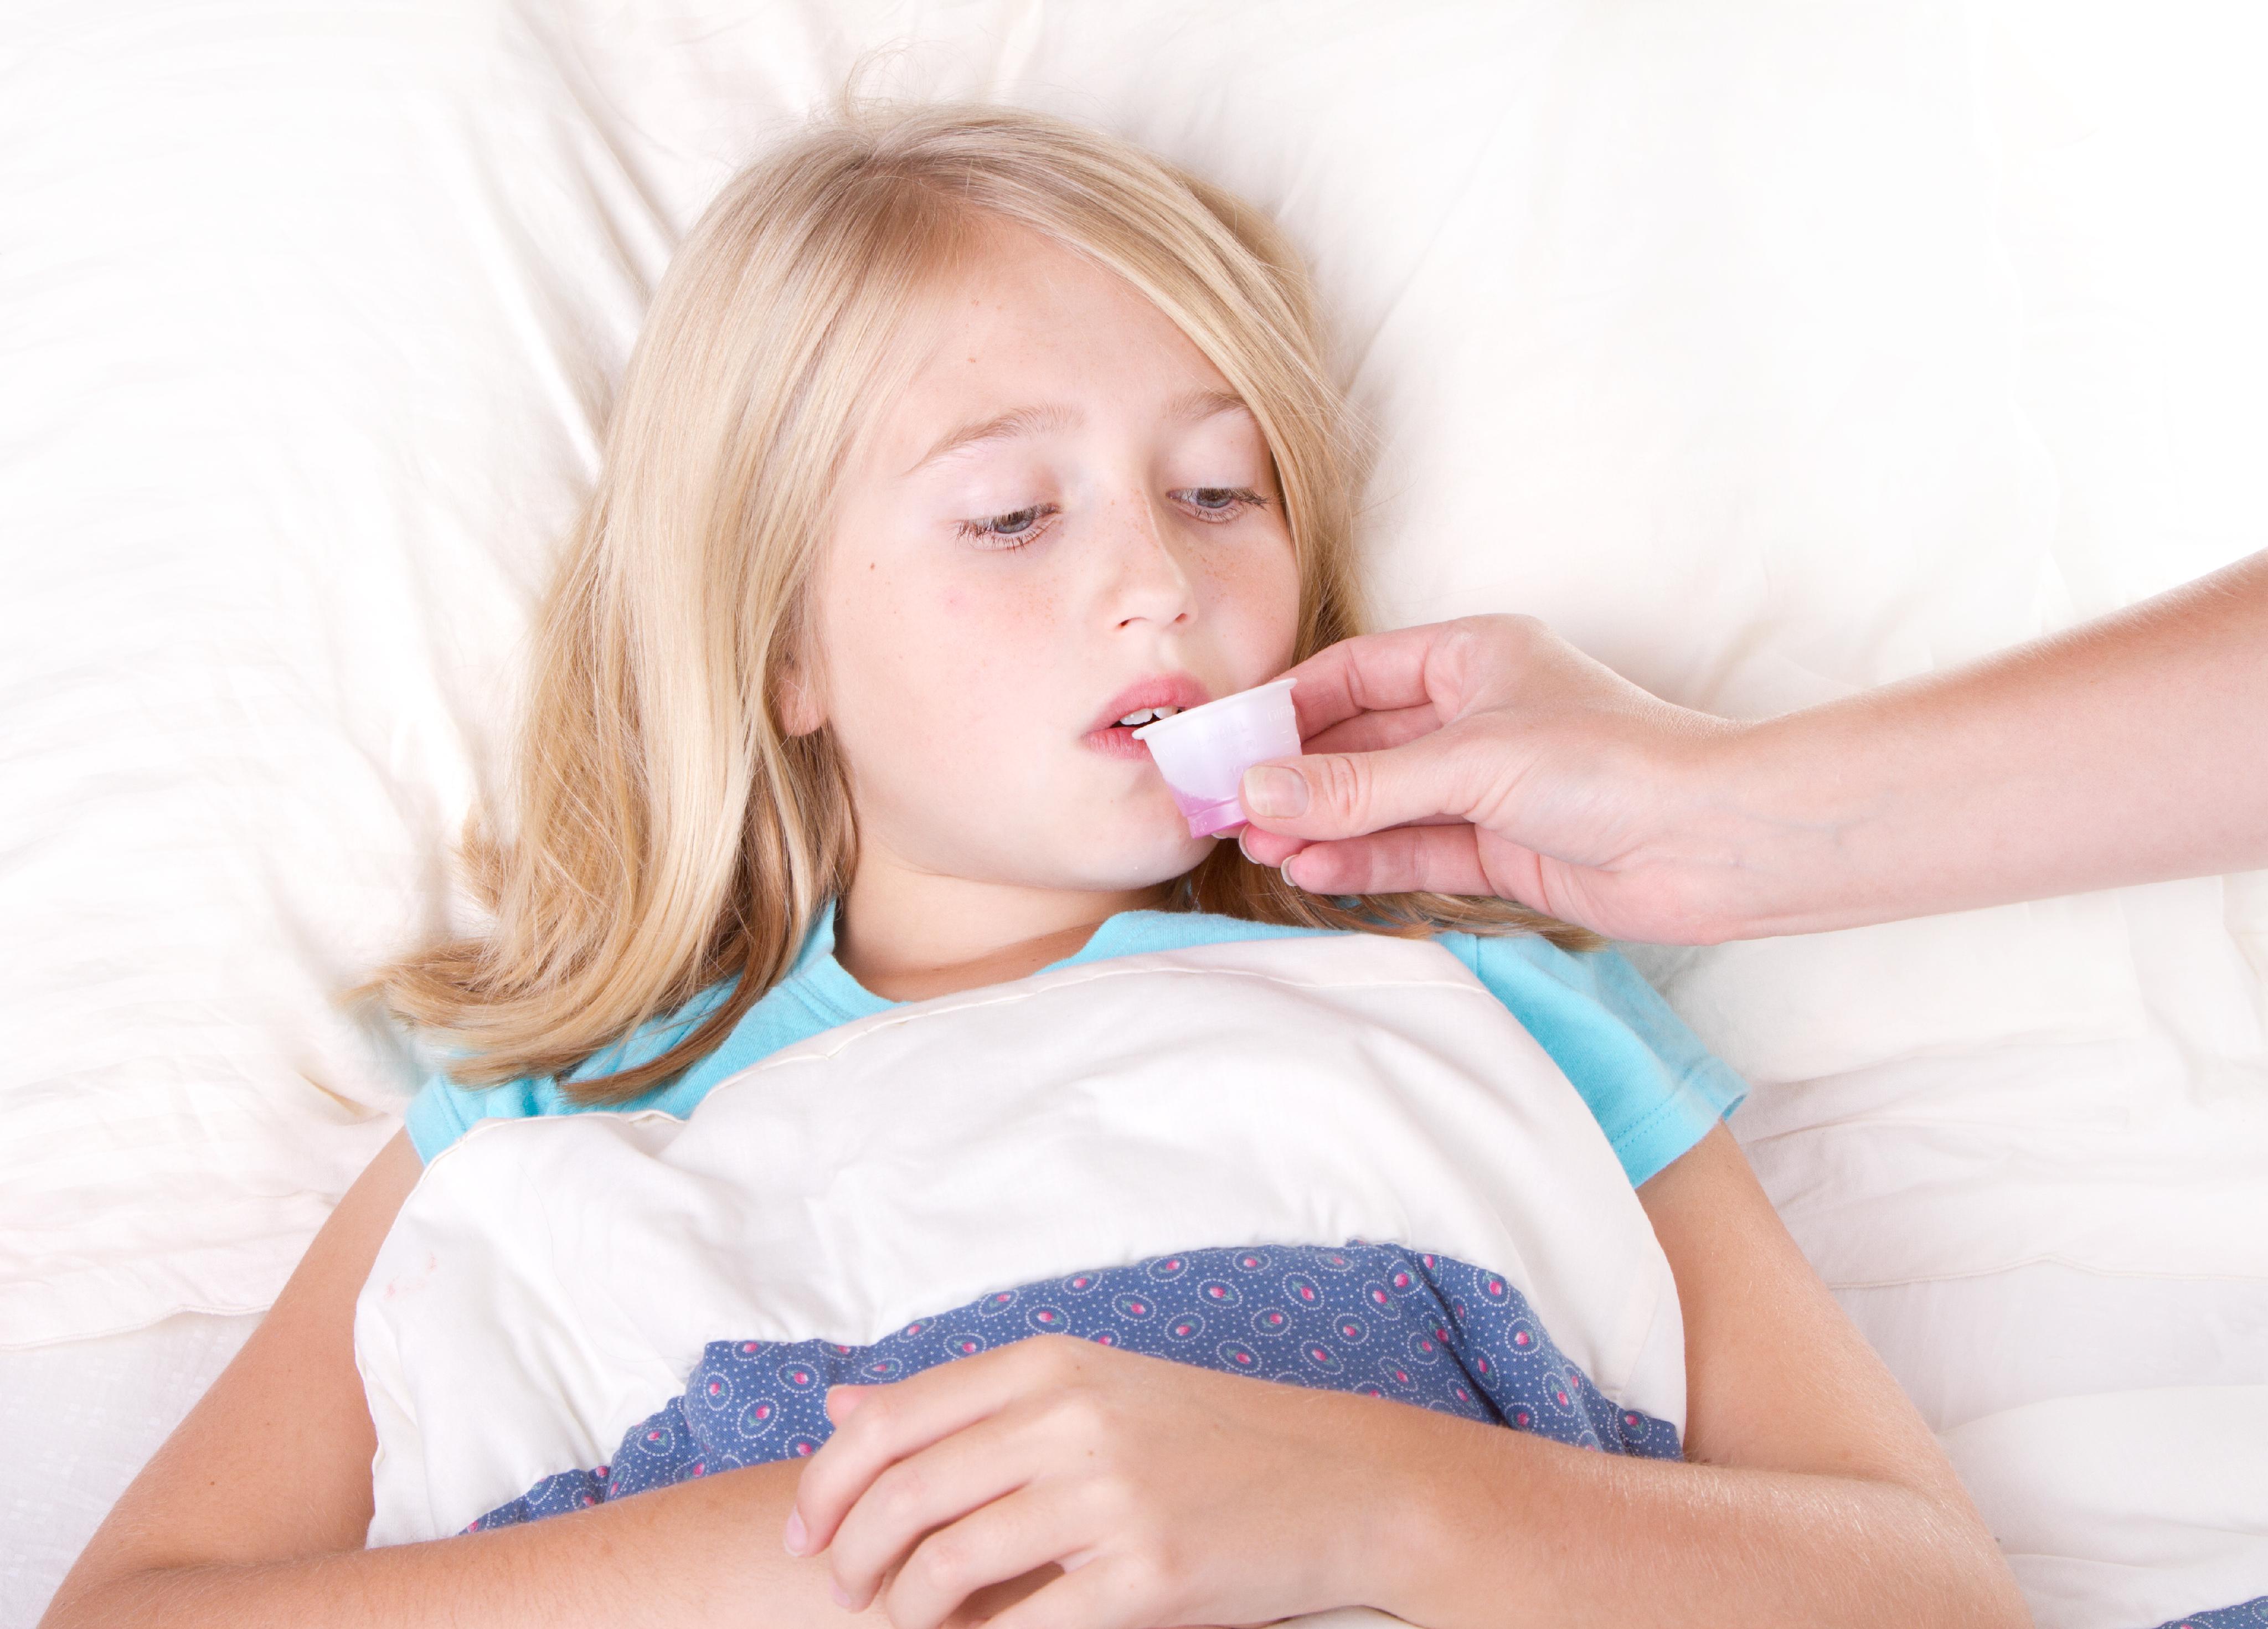 Should You Give Kids Medicine for Coughs and Colds?